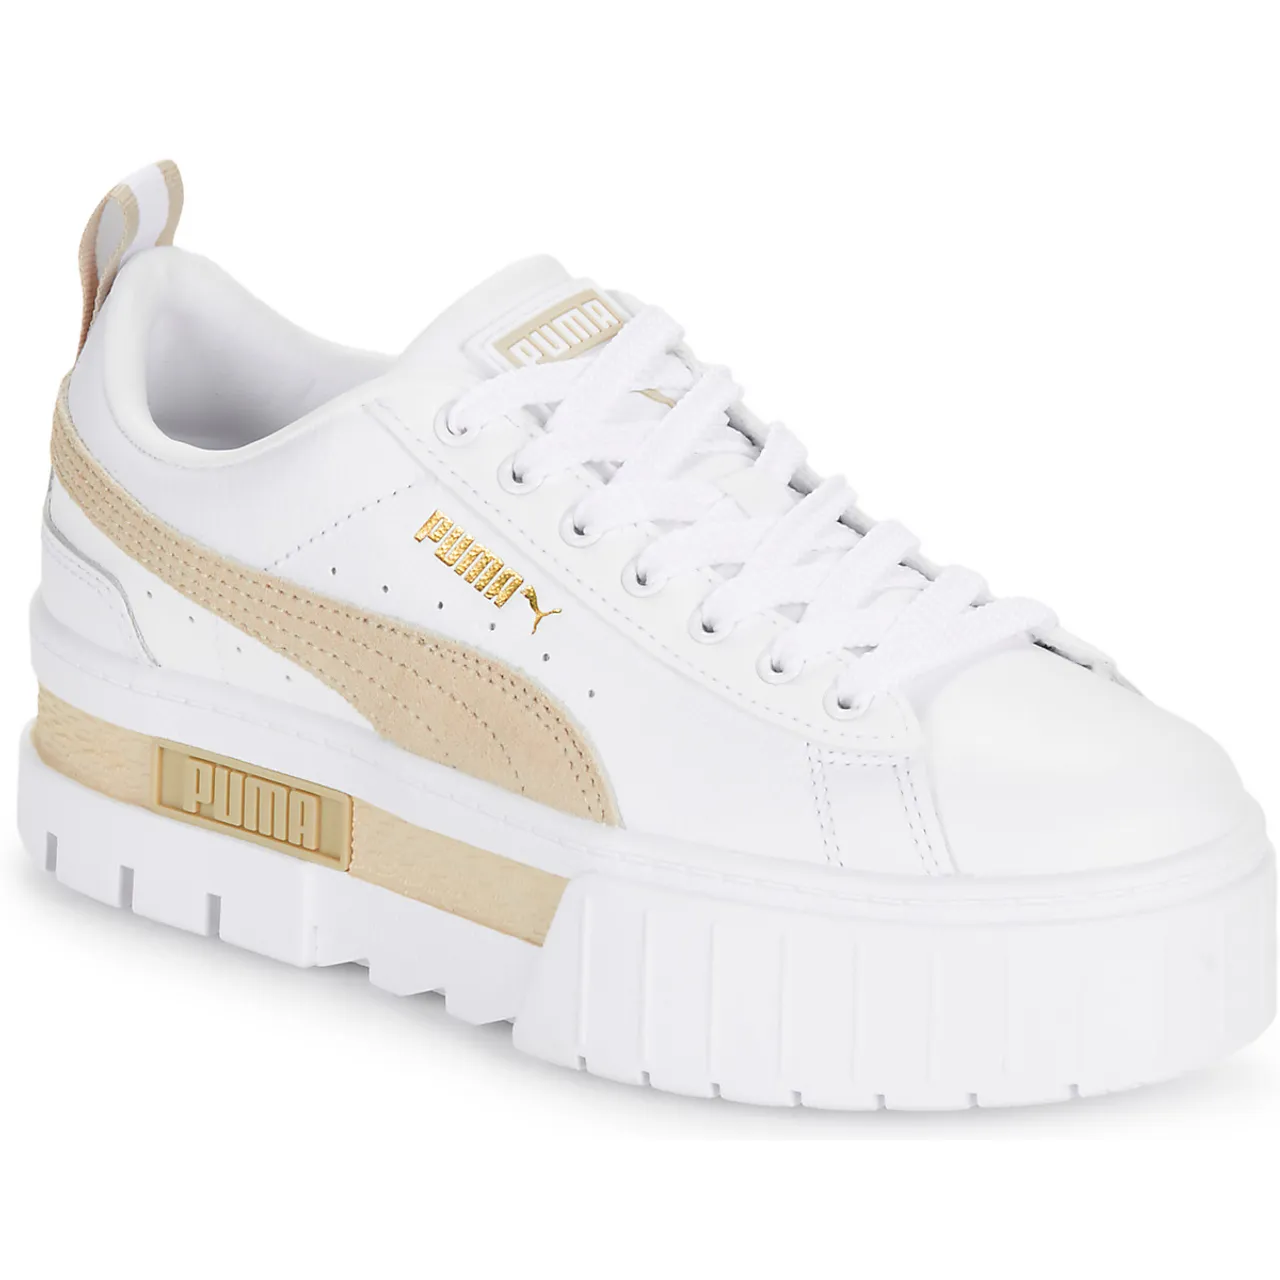 Puma  MAYZE  women's Shoes (Trainers) in White